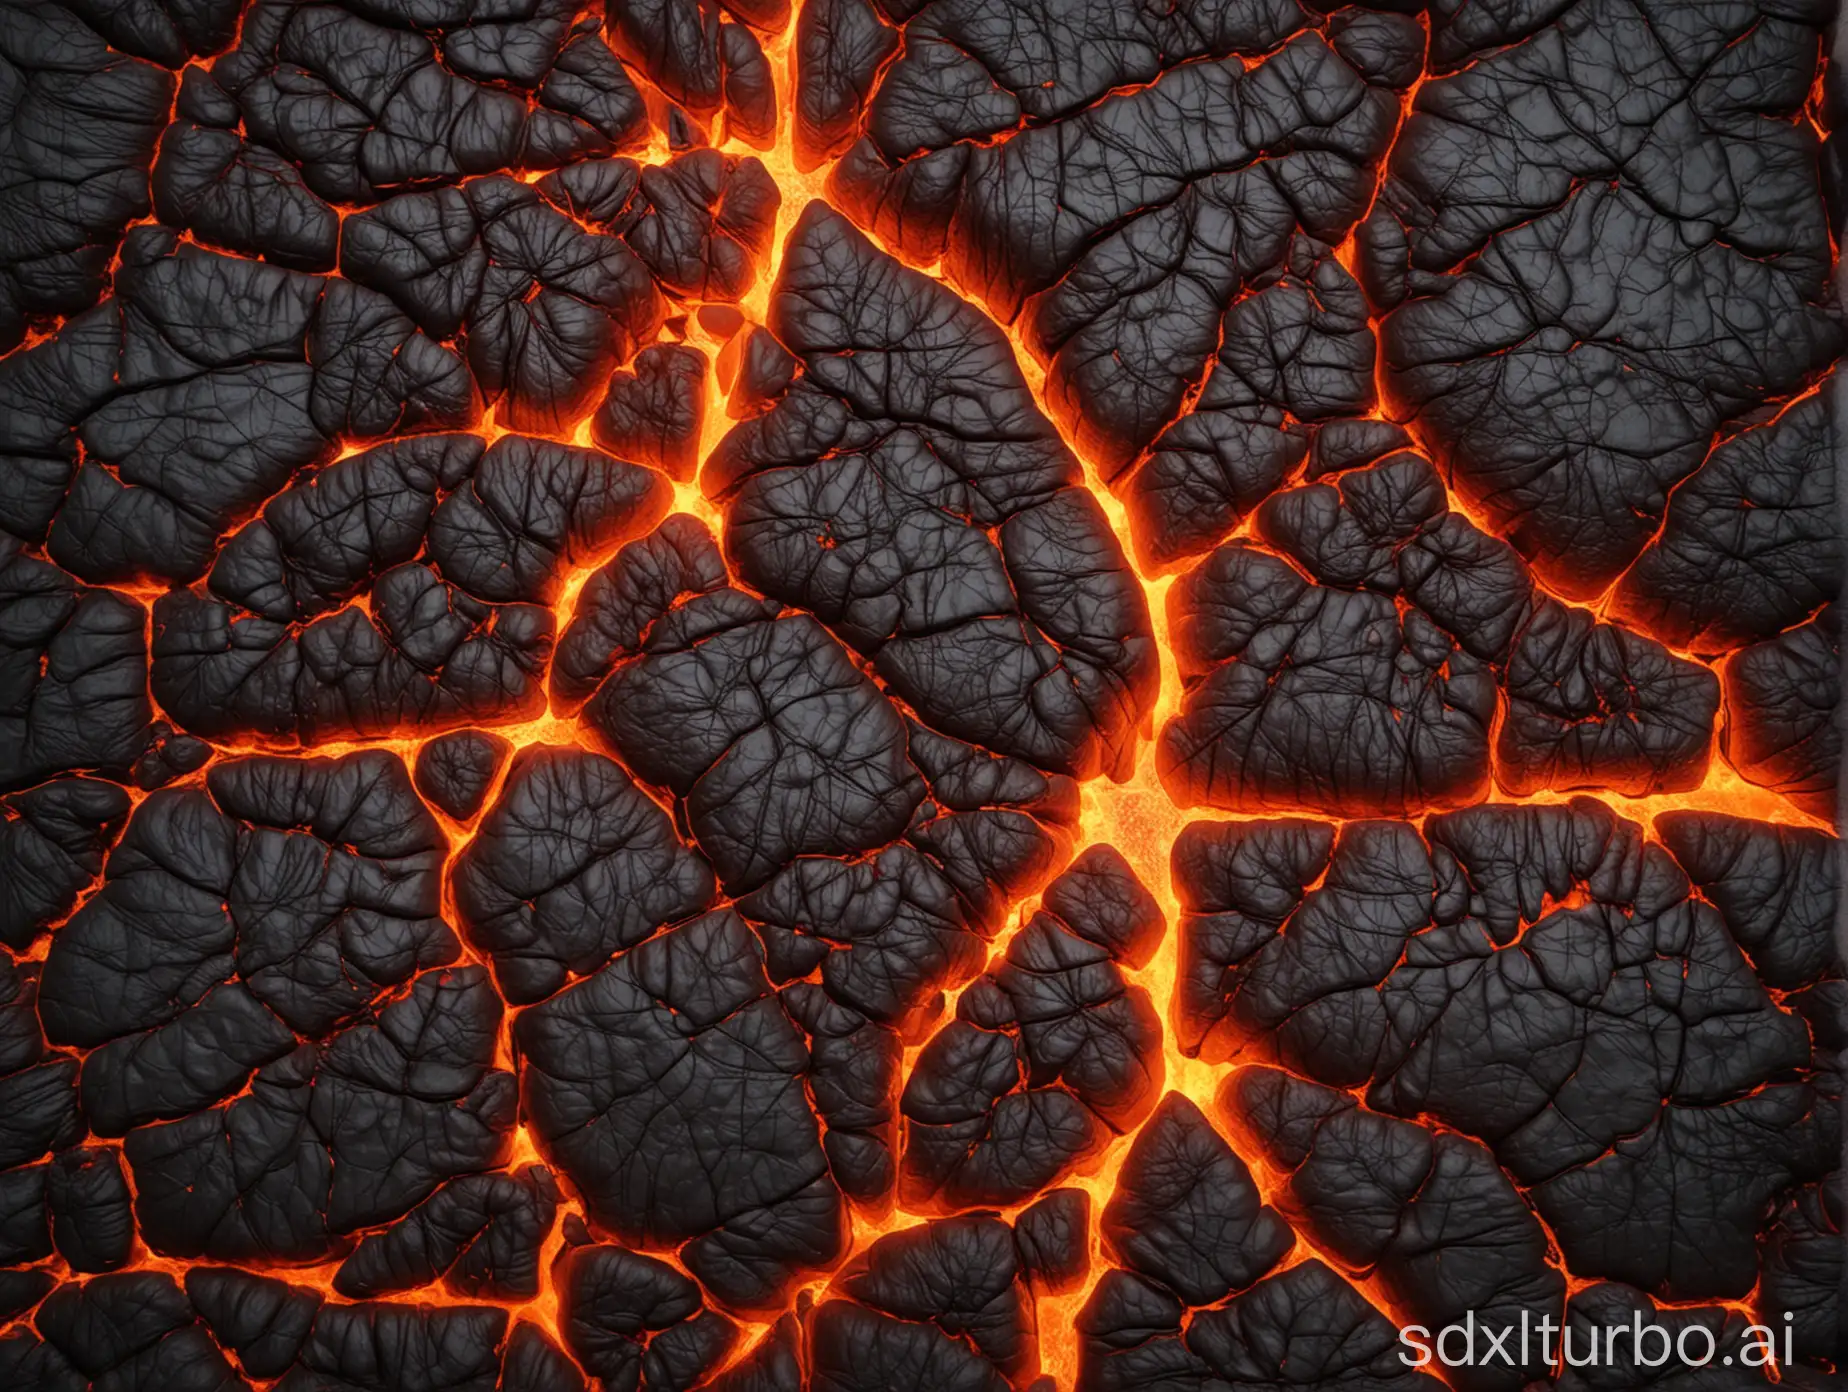 Volcanic-Lava-Cracked-Texture-Fiery-Patterns-of-Natures-Fury